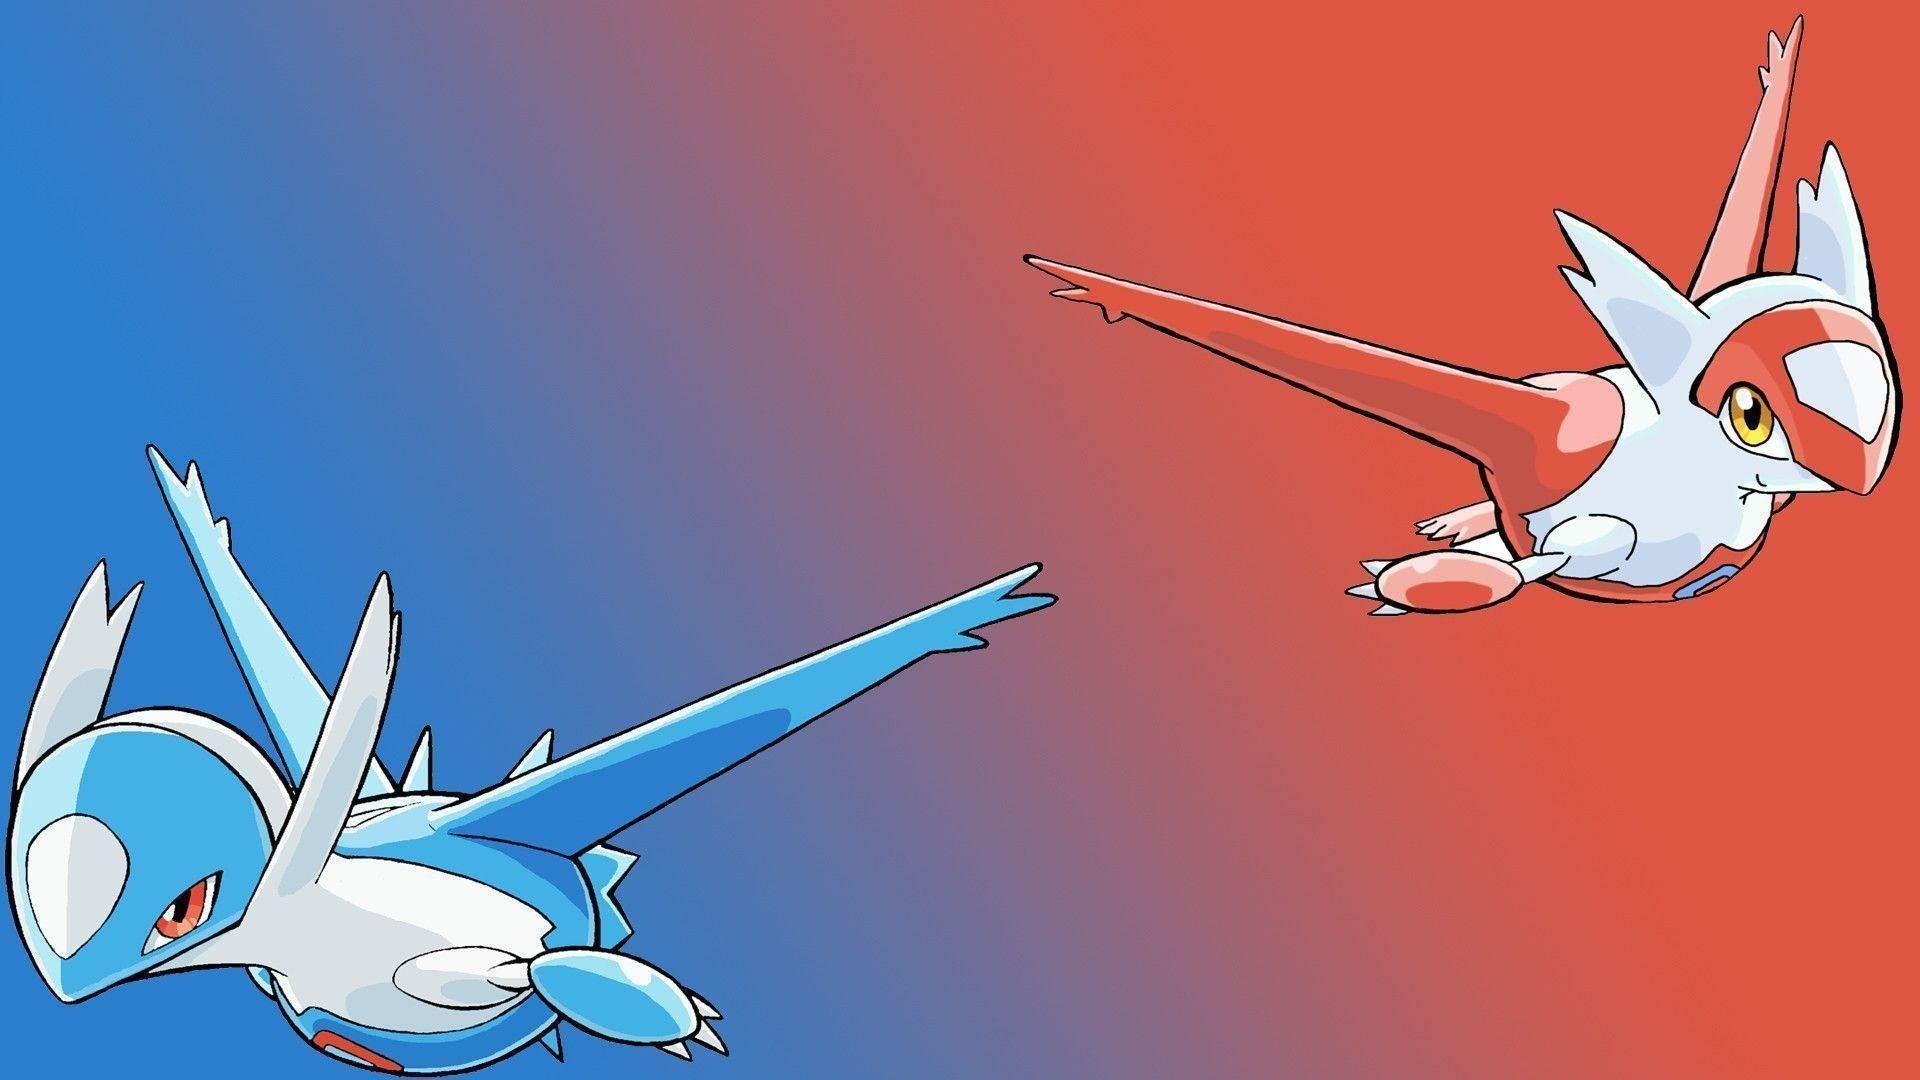 Latios wallpapers, Top choices, Creative backgrounds, Popular collection, 1920x1080 Full HD Desktop